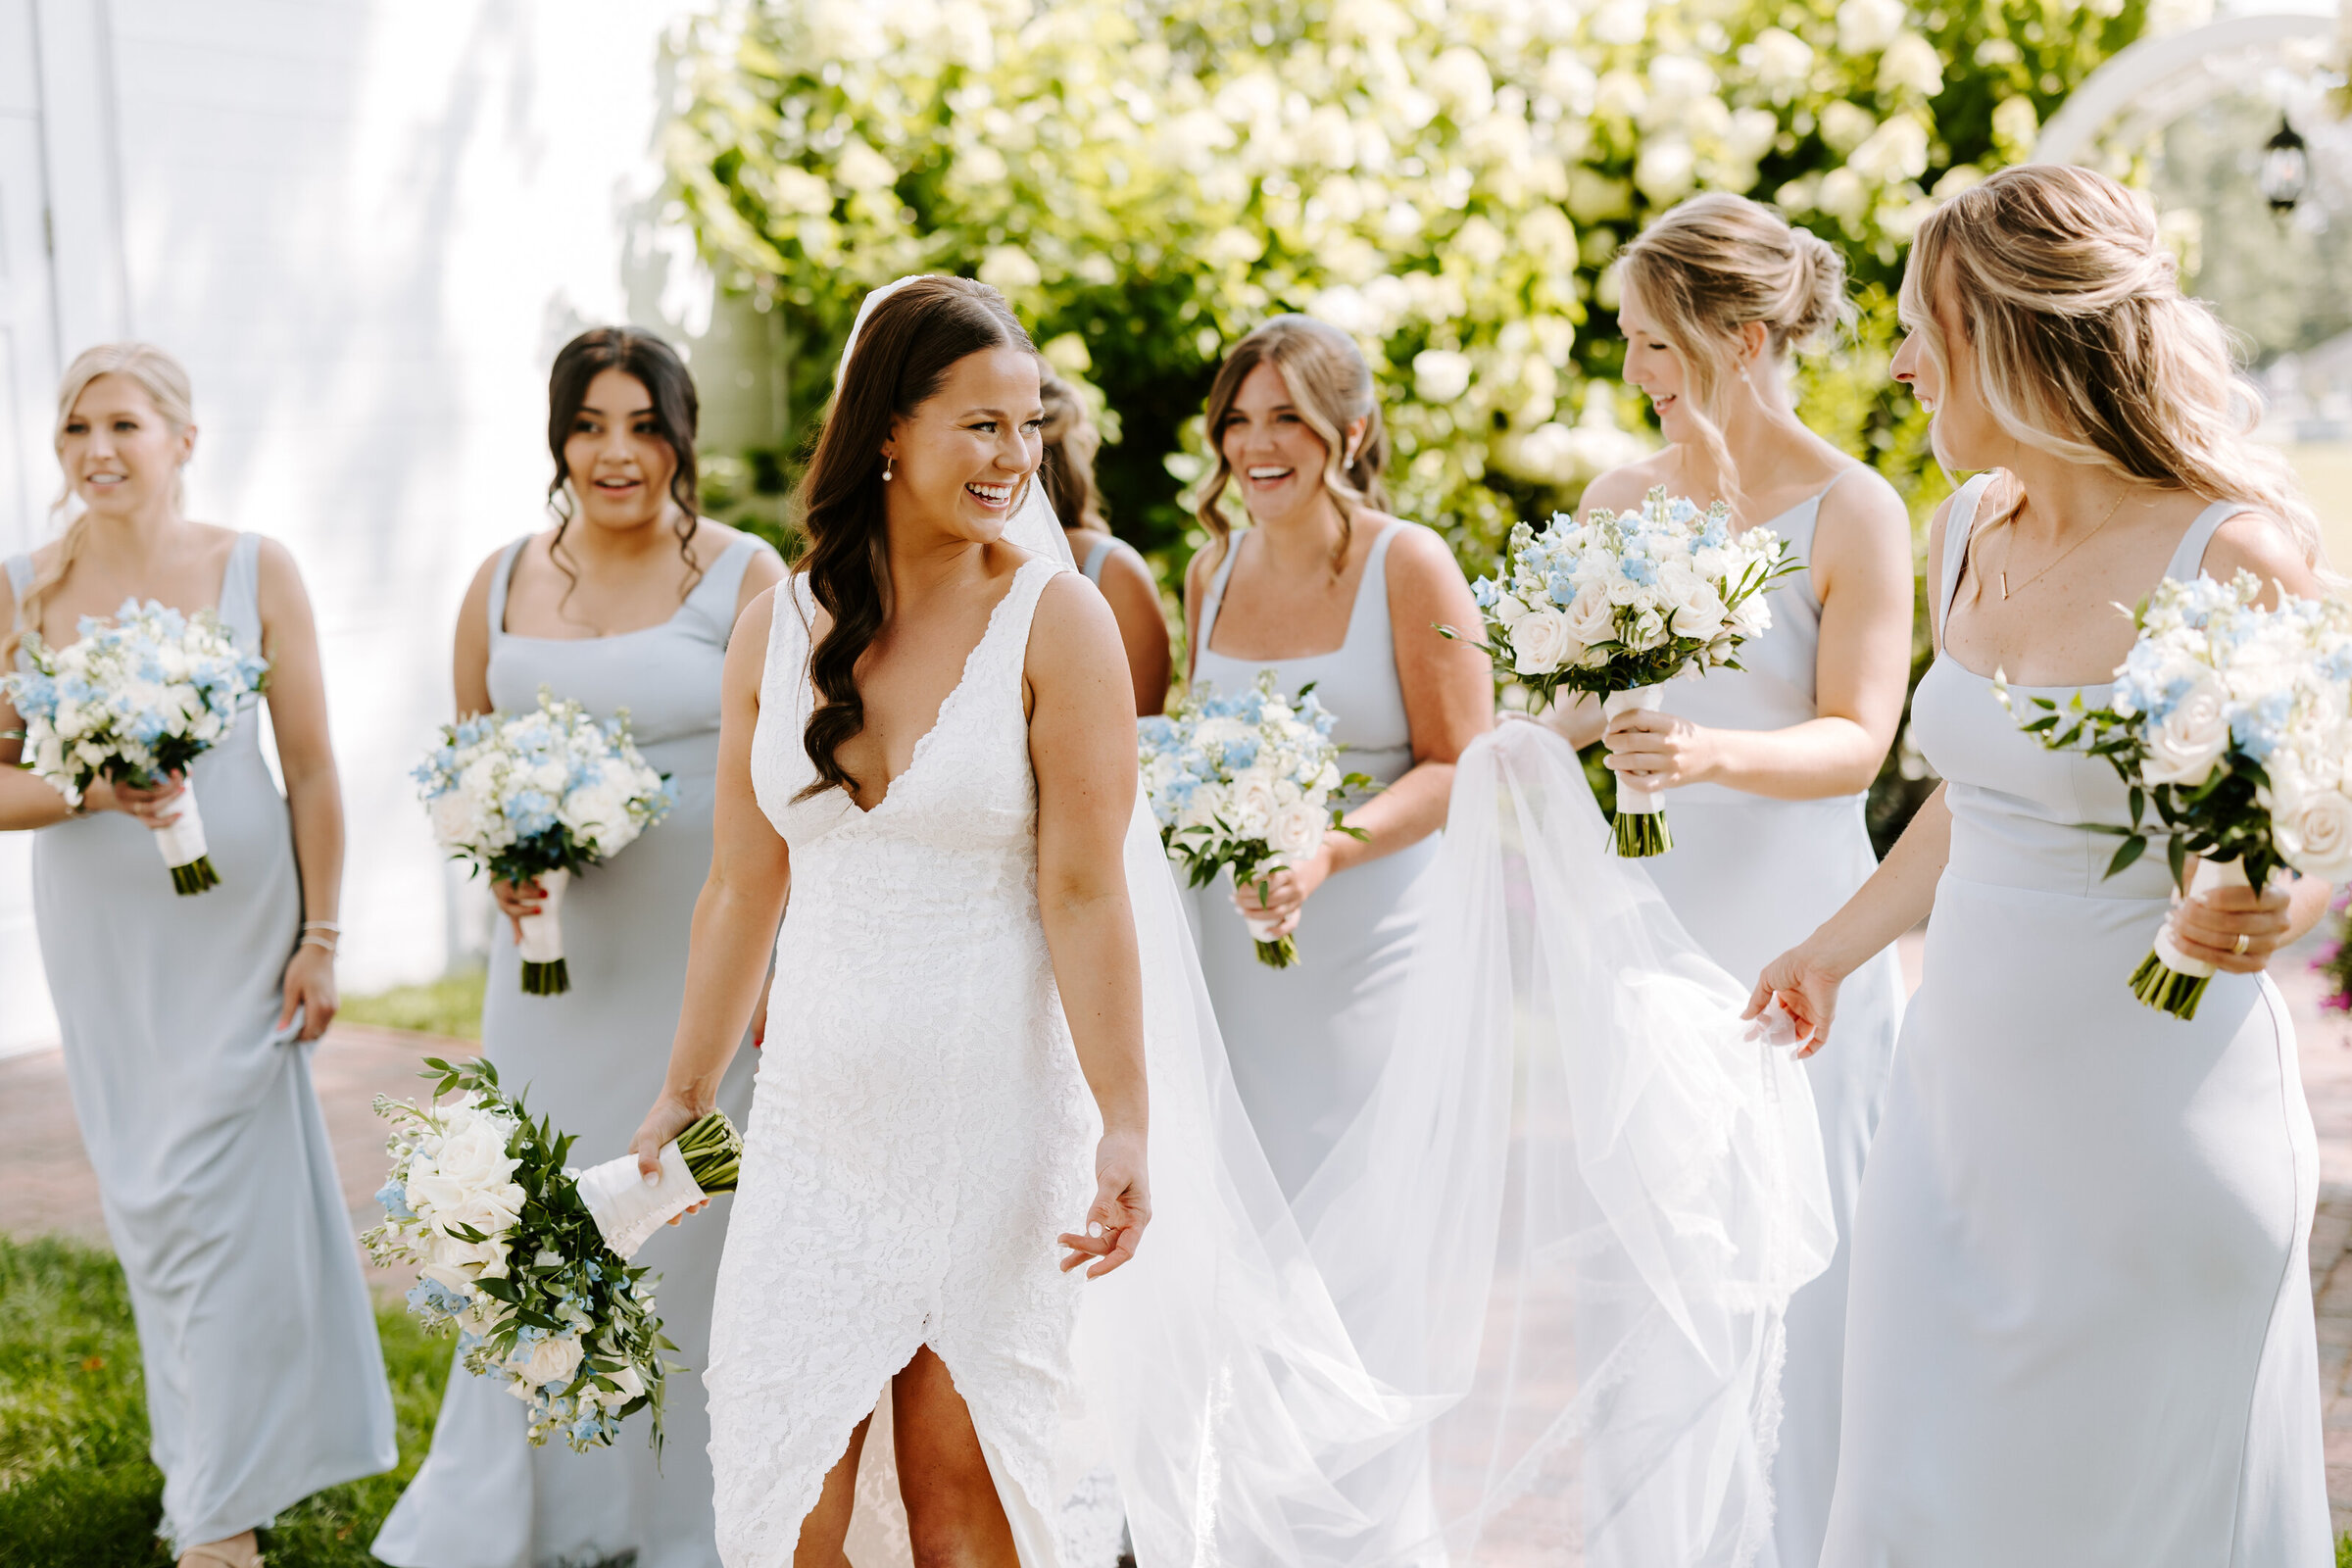 Bride walks with her bridesmaids prior to wedding ceremony at The Commons 1854 in Boston, Massachusetts